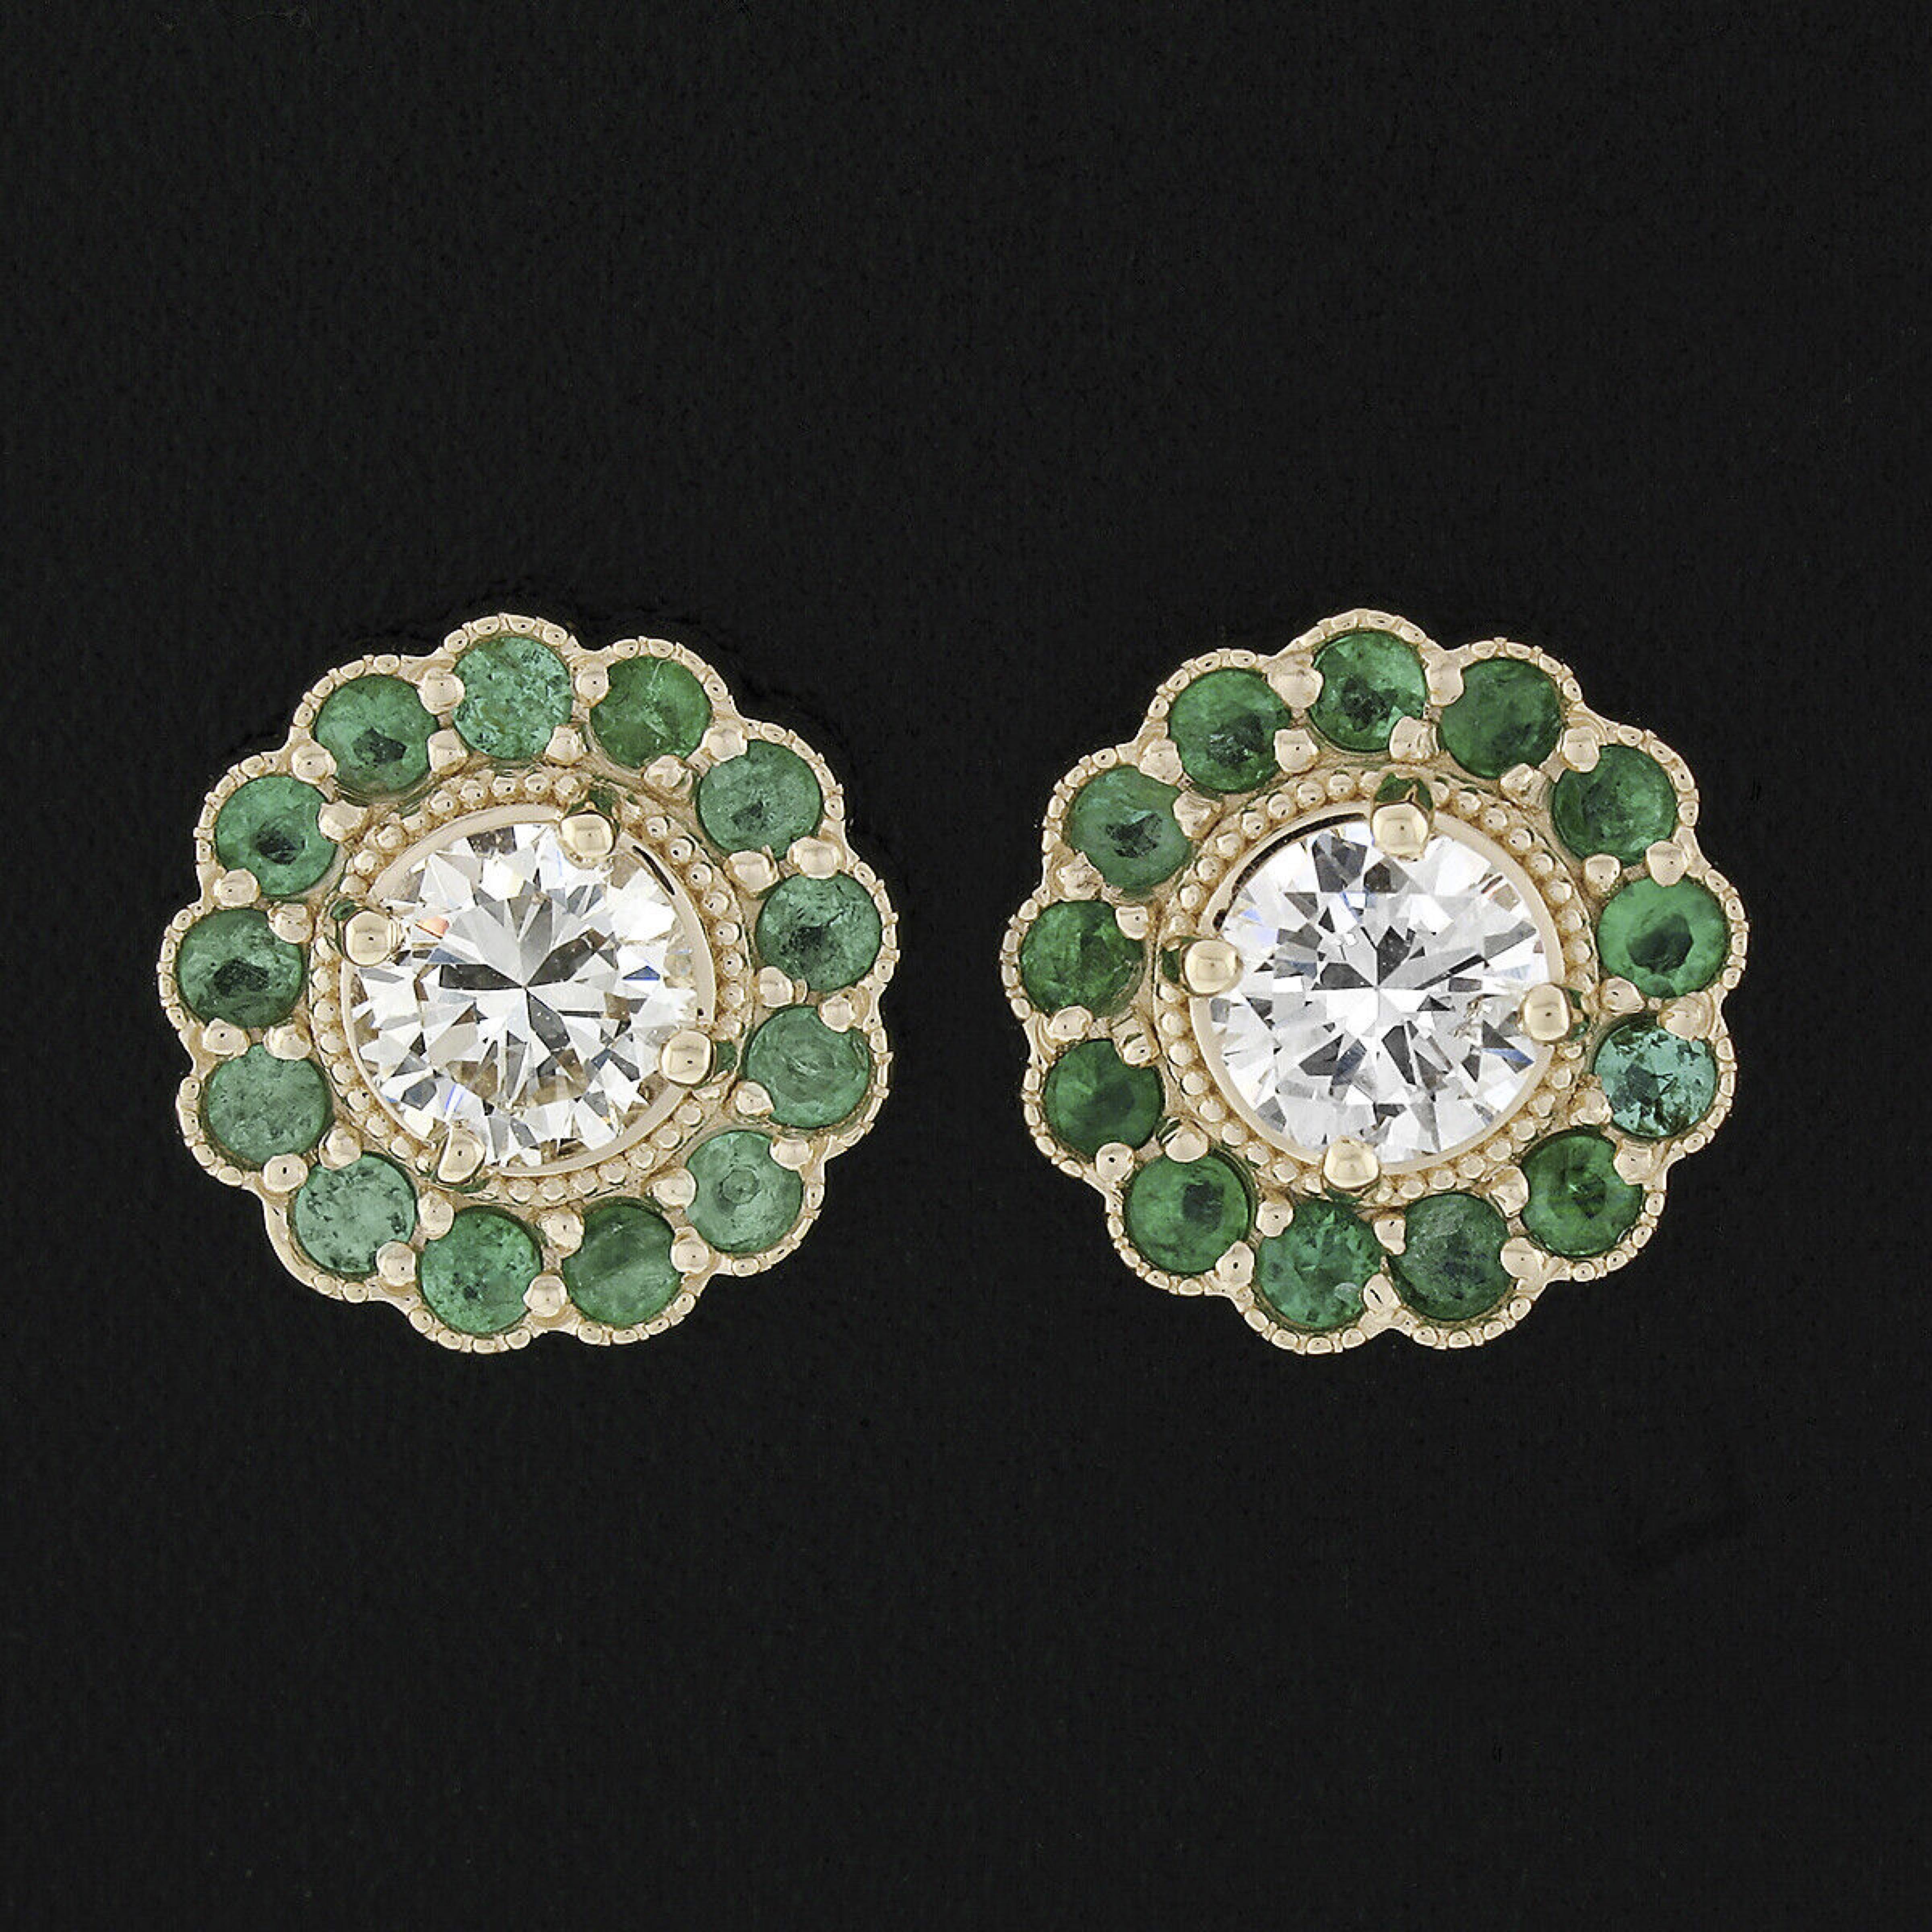 This is an absolutely gorgeous pair of diamond and emerald cluster flower earrings that very well crafted in solid 14k yellow gold. Each earring features a round brilliant prong set diamond at its center with a halo of very attractive and beautiful